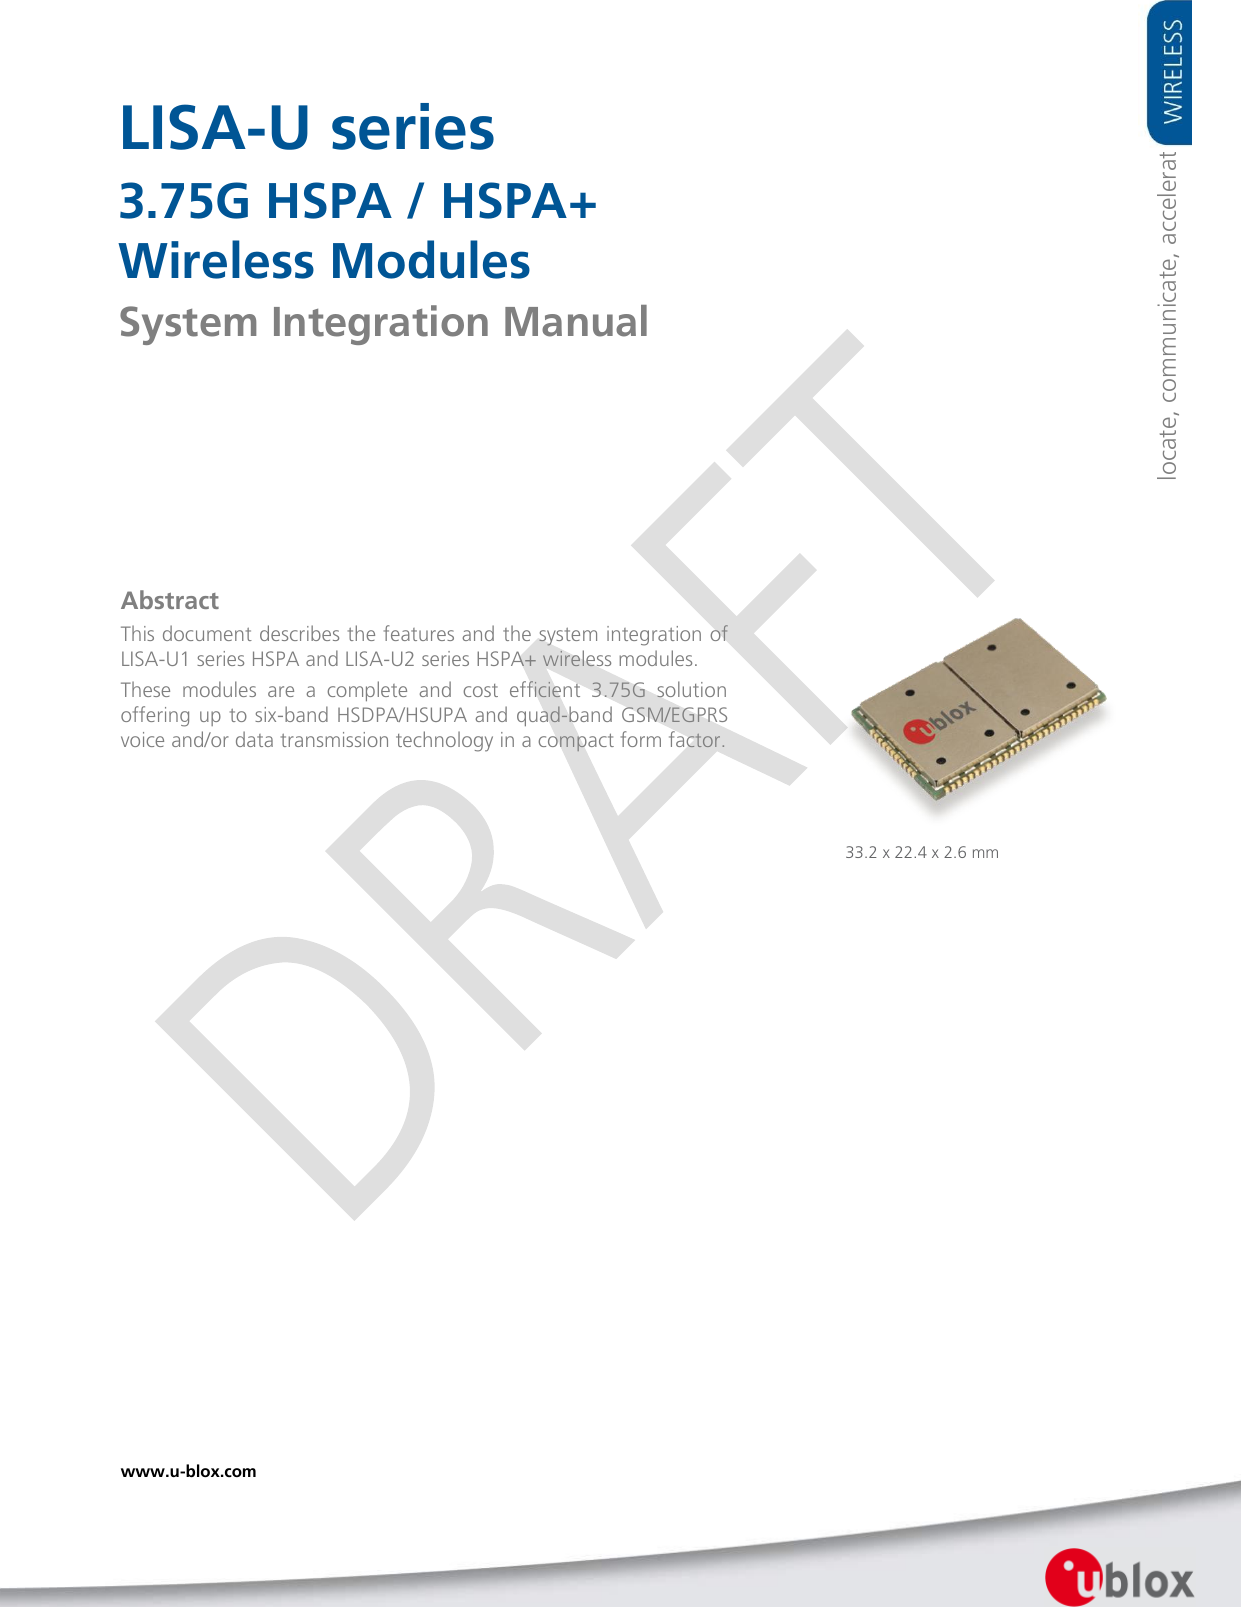    LISA-U series 3.75G HSPA / HSPA+ Wireless Modules System Integration Manual                Abstract This document describes the features and the system integration of LISA-U1 series HSPA and LISA-U2 series HSPA+ wireless modules. These  modules  are  a  complete  and  cost  efficient  3.75G  solution offering up to six-band HSDPA/HSUPA and quad-band GSM/EGPRS voice and/or data transmission technology in a compact form factor.  locate, communicate, accelerate 33.2 x 22.4 x 2.6 mm www.u-blox.com   